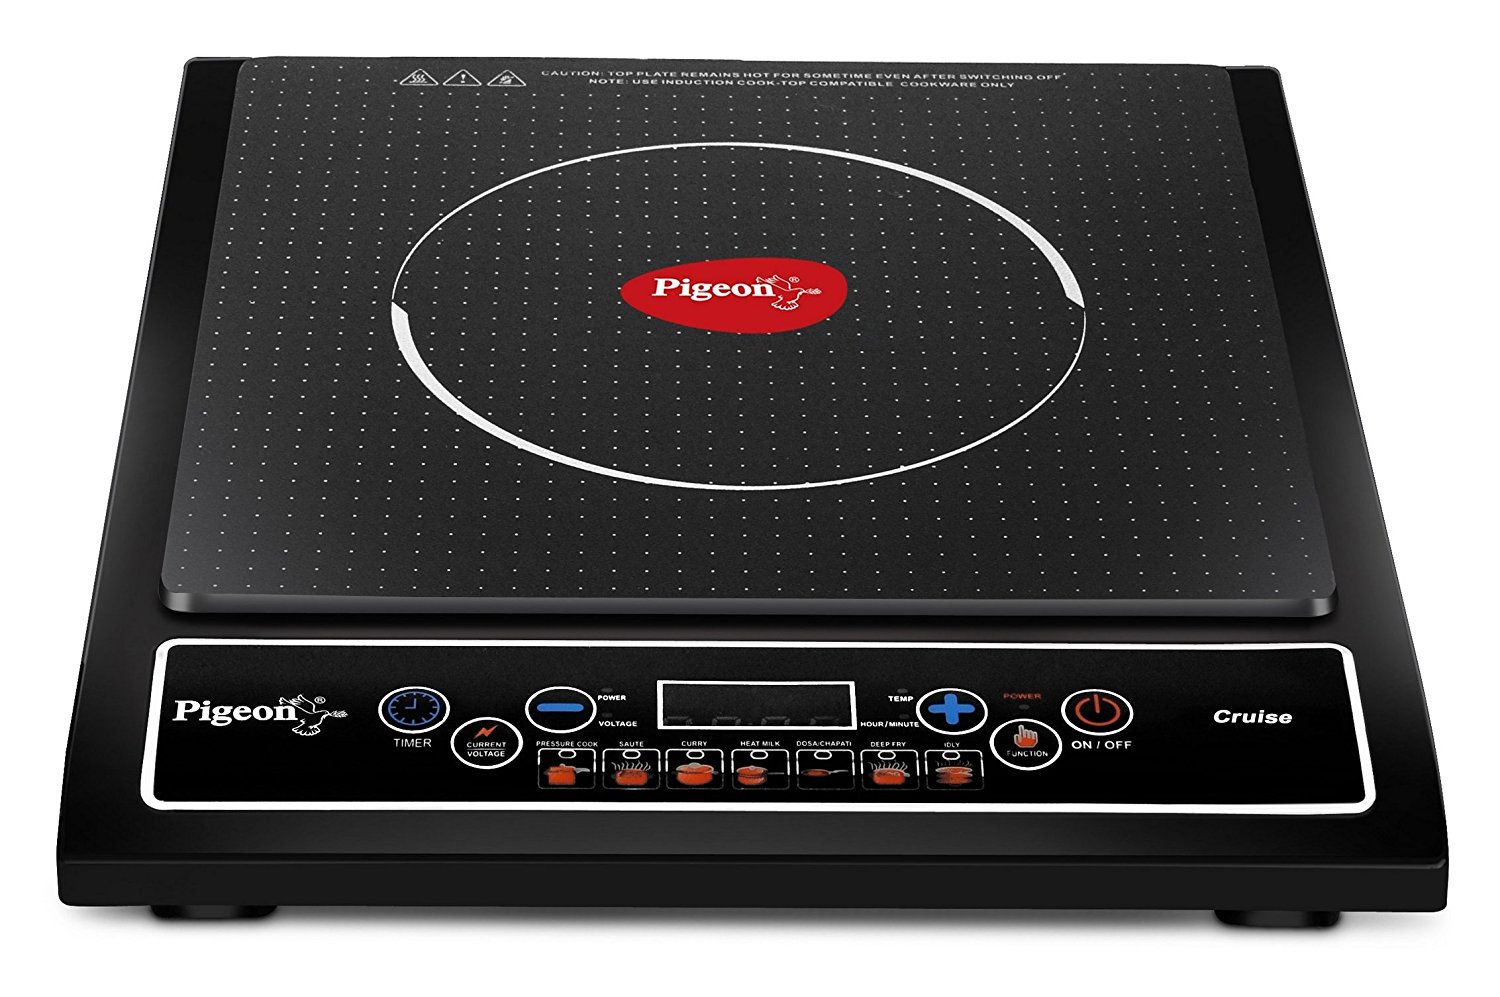 Amazon Offers : Get upto 60% off on Induction